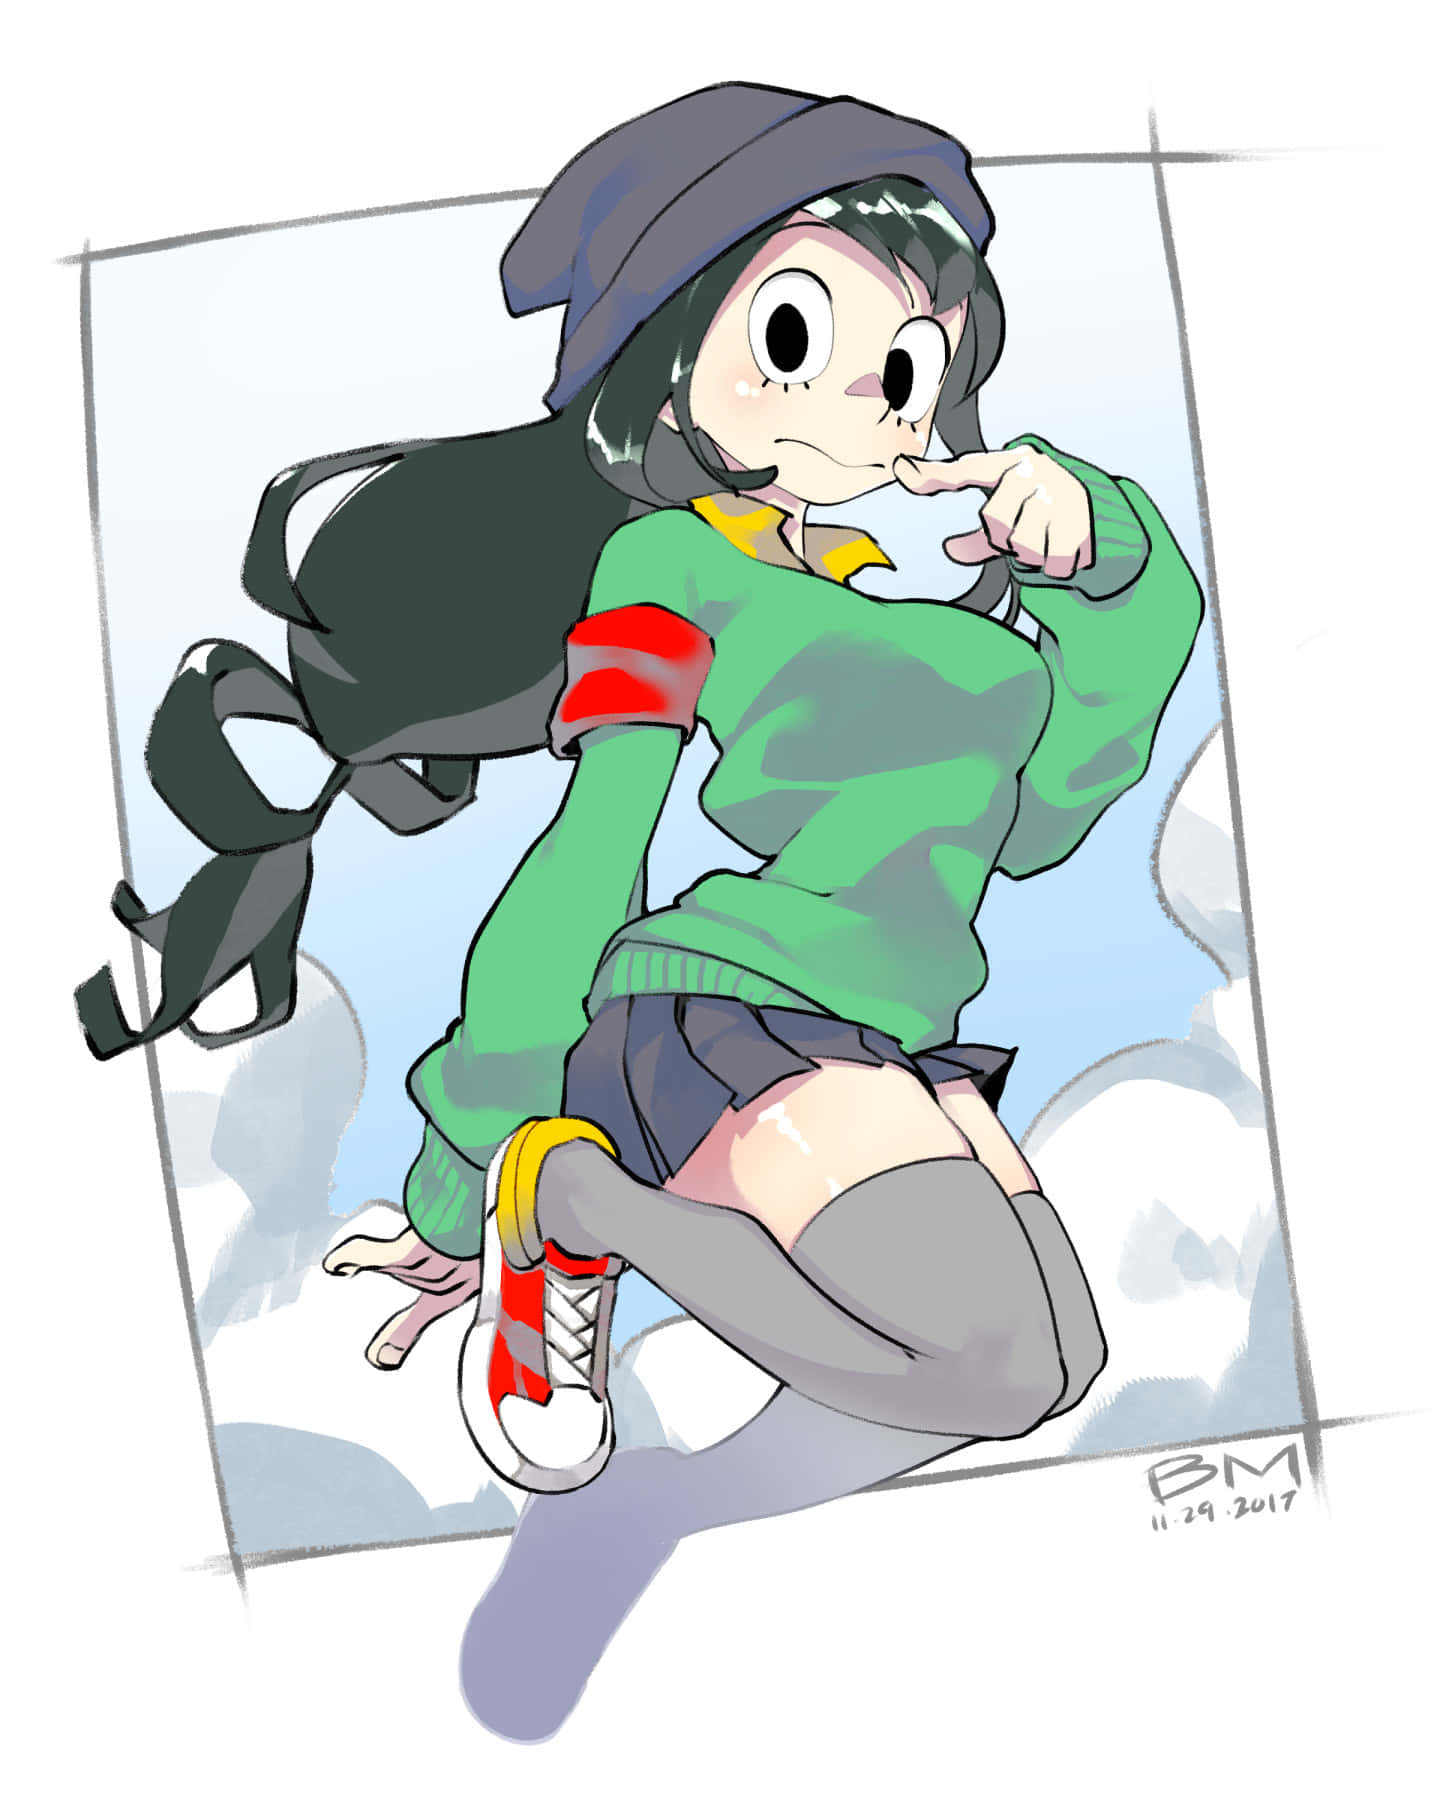 Froppy, a beautiful giant frog character in Haikyuu!